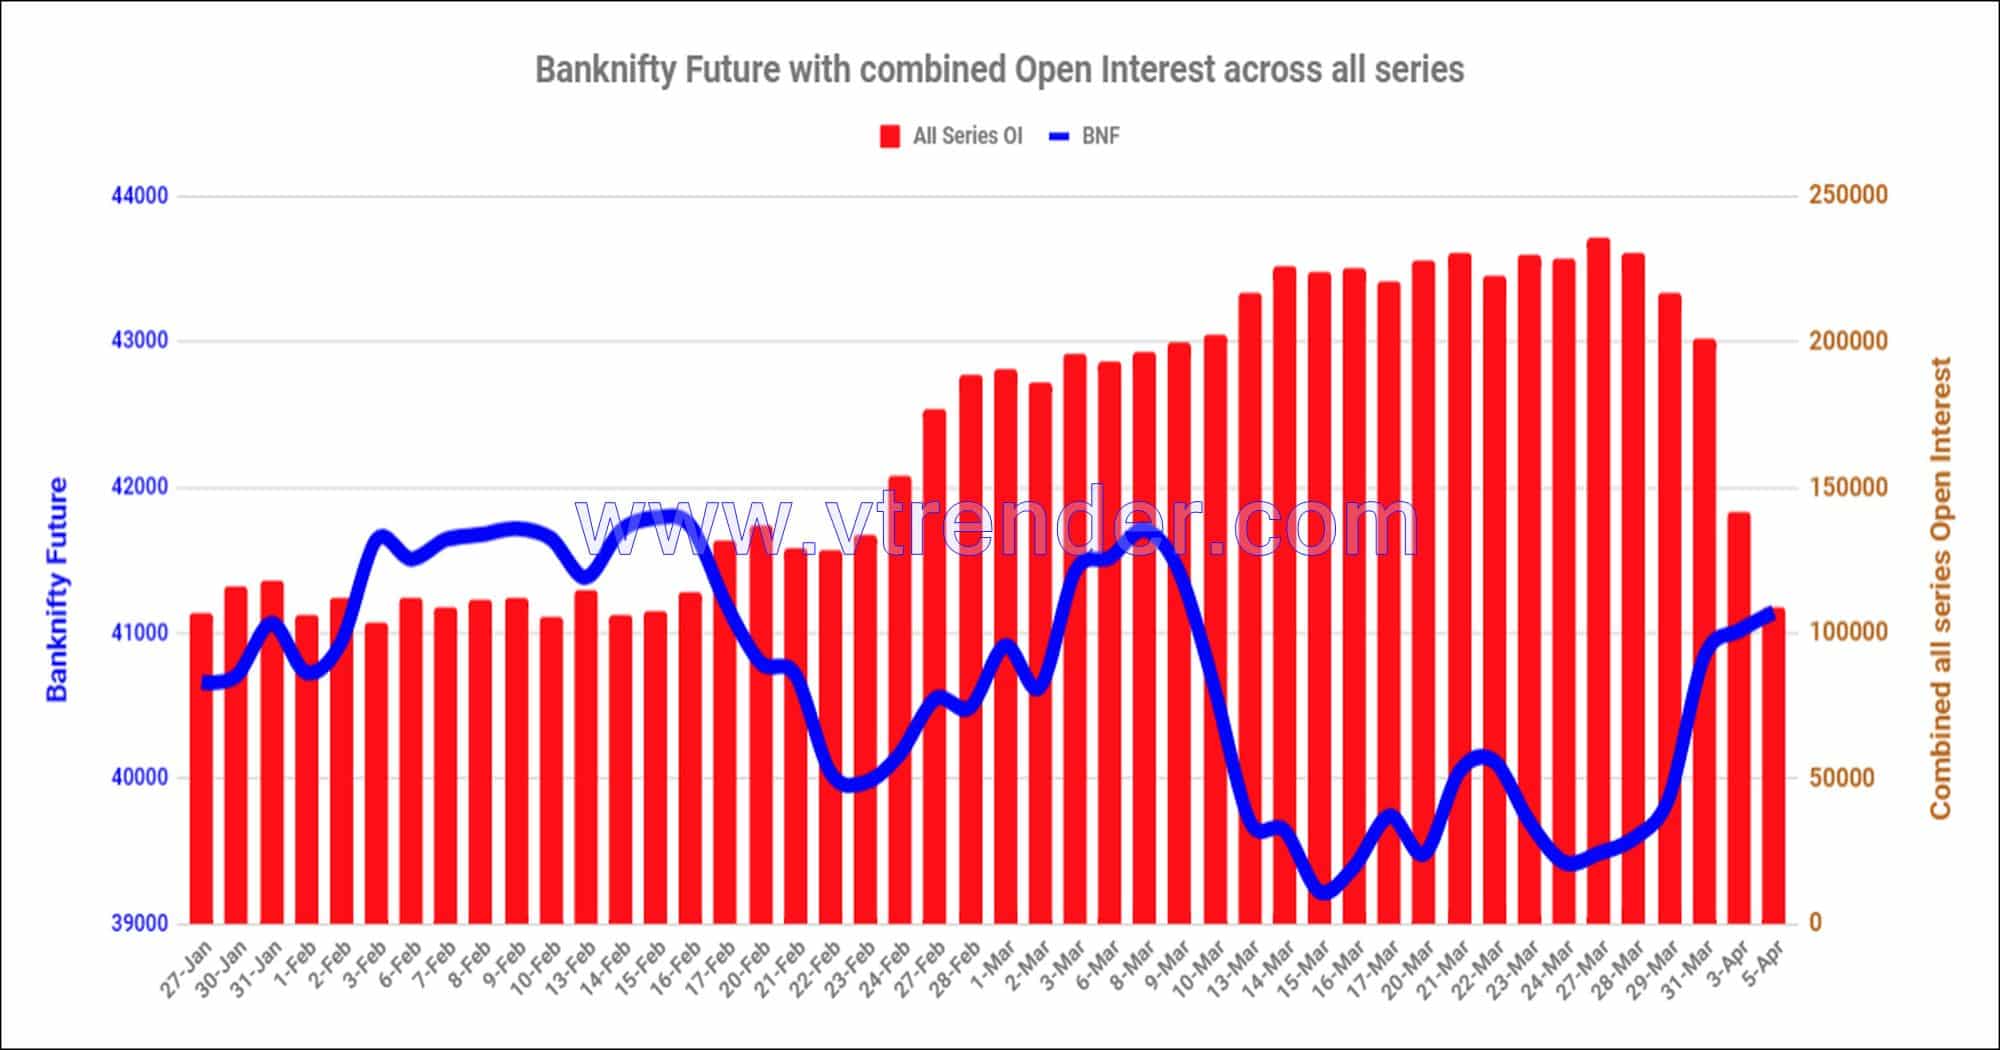 Bnf05Apr Nifty And Banknifty Futures With All Series Combined Open Interest – 5Th Apr 2023 Banknifty, Nifty, Open Interest